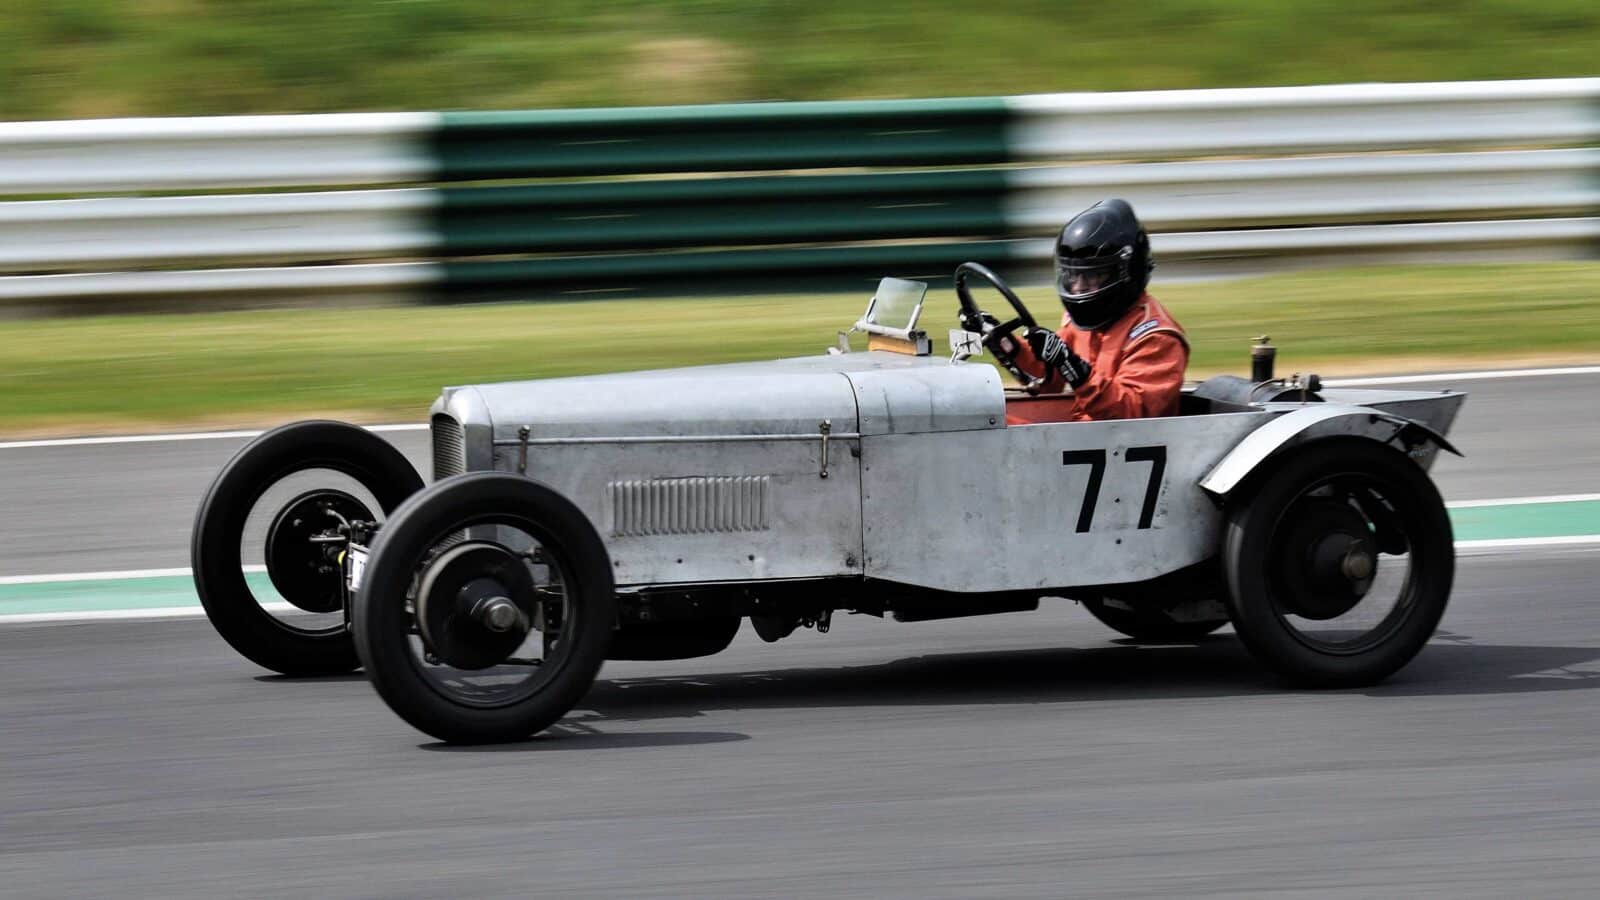 Robert Moore in action at Cadwell